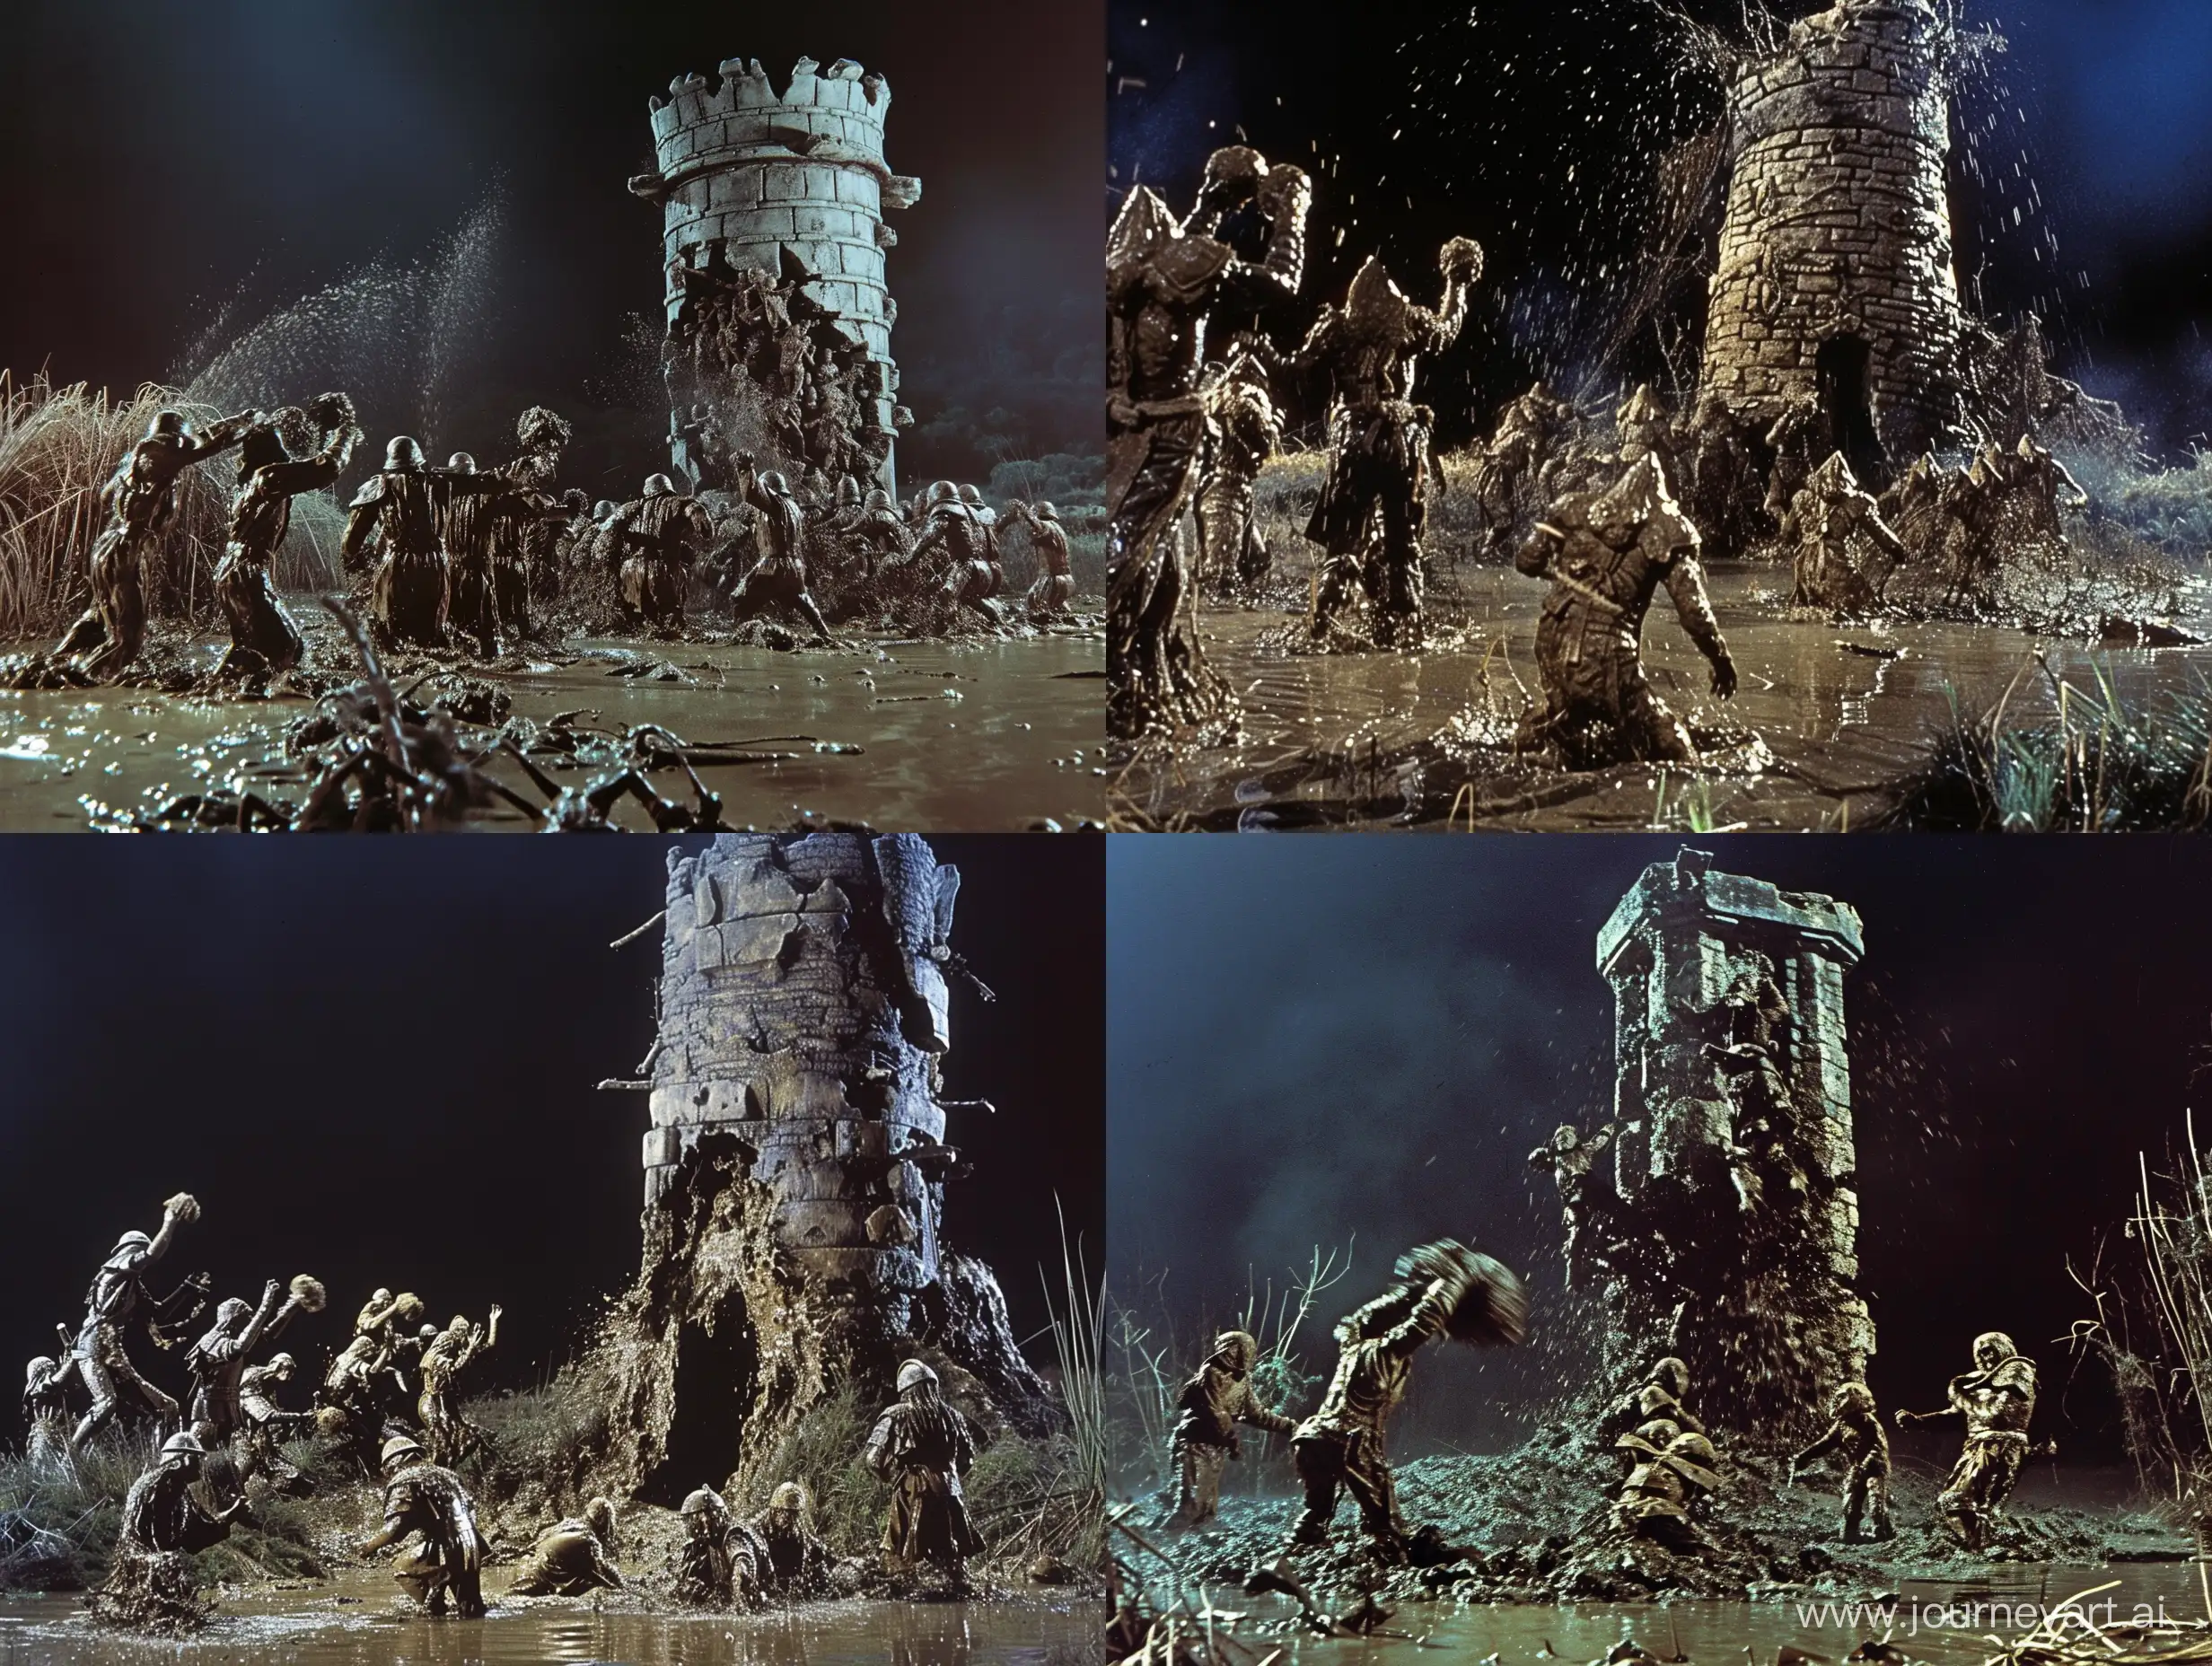 dvd screenengrabs character/arx fatalis small mud men composed of swampy mud throwing clumps of mud at a group of group of lightly armored warriors emerging from a crumbling ancient stone work tower emerging from a swampy marshland at night dark fantasy 1980 style